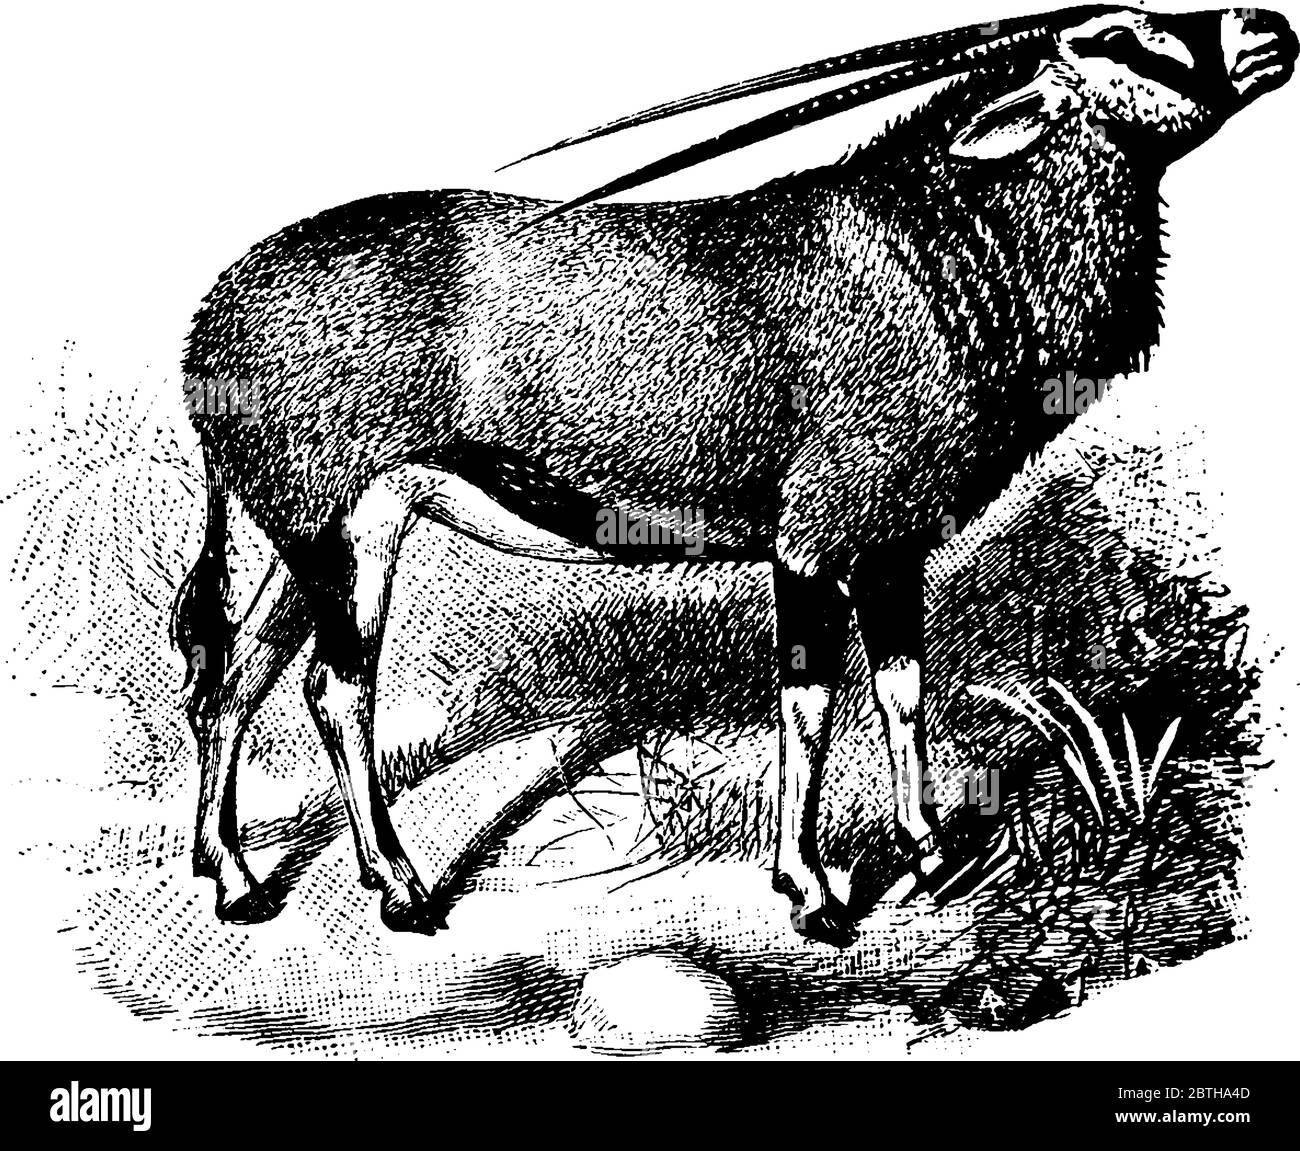 The Gemsbok or Oryx is one of the characteristic animals of the arid regions of Southern Africa., vintage line drawing or engraving illustration. Stock Vector